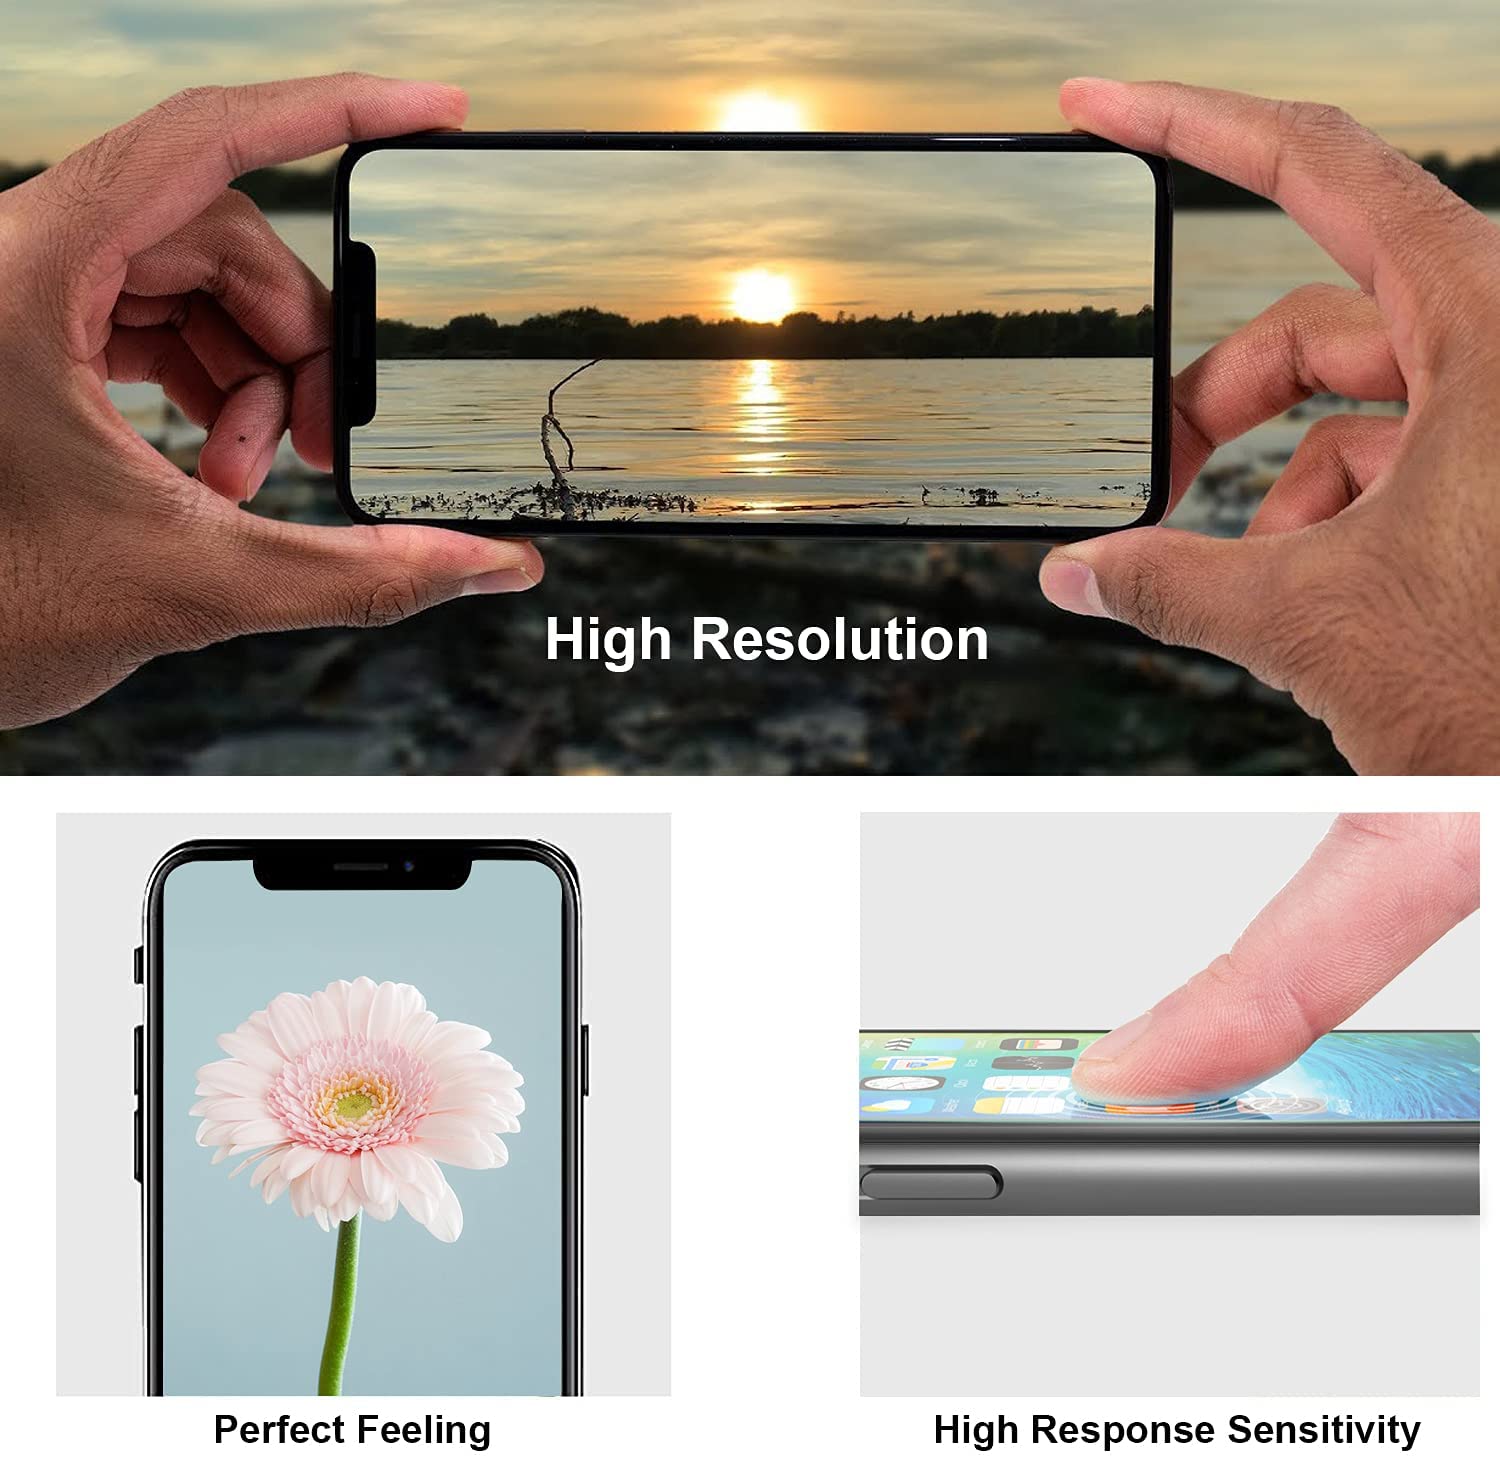 IPhoneXR Mobile Phone LCD Touch Screen Phone Screen Replacement Manufacturers